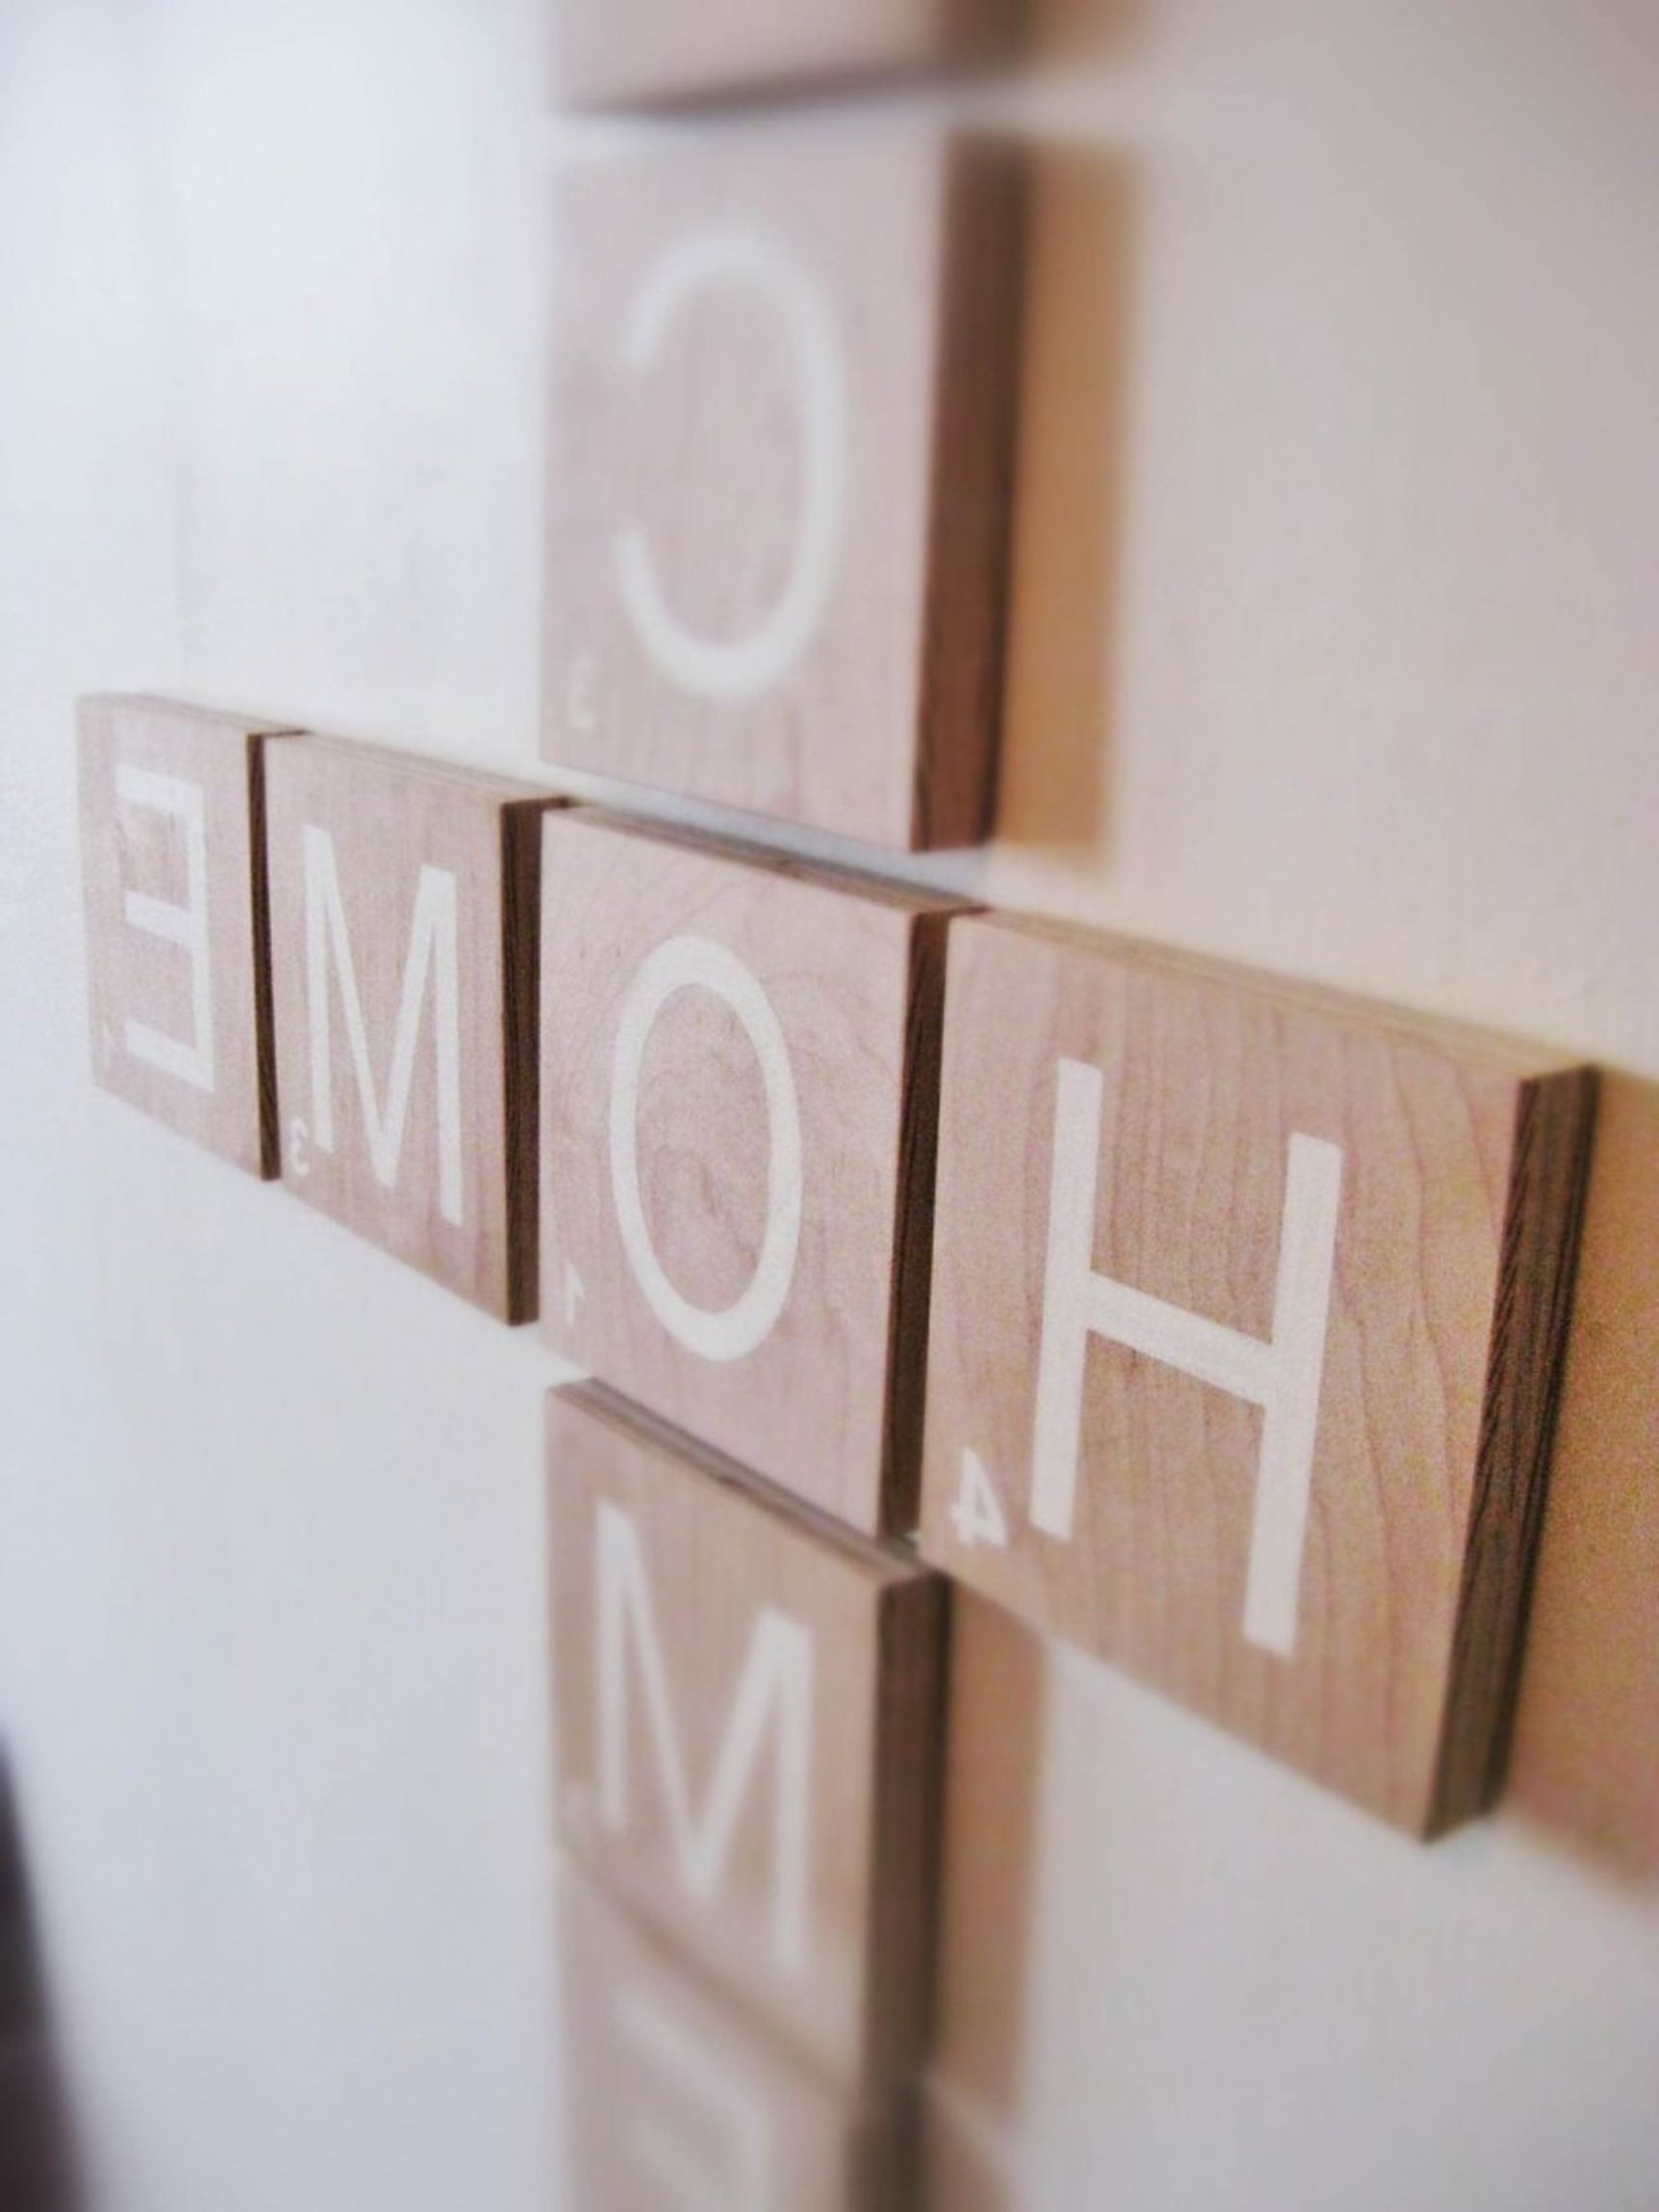 Accessories Interesting Home Wooden Scrabble Wall Letters As Wall Decoration In Bedroom Areas Adorable Wall Decoration Using Scrabble Wall Letters (View 23 of 28)